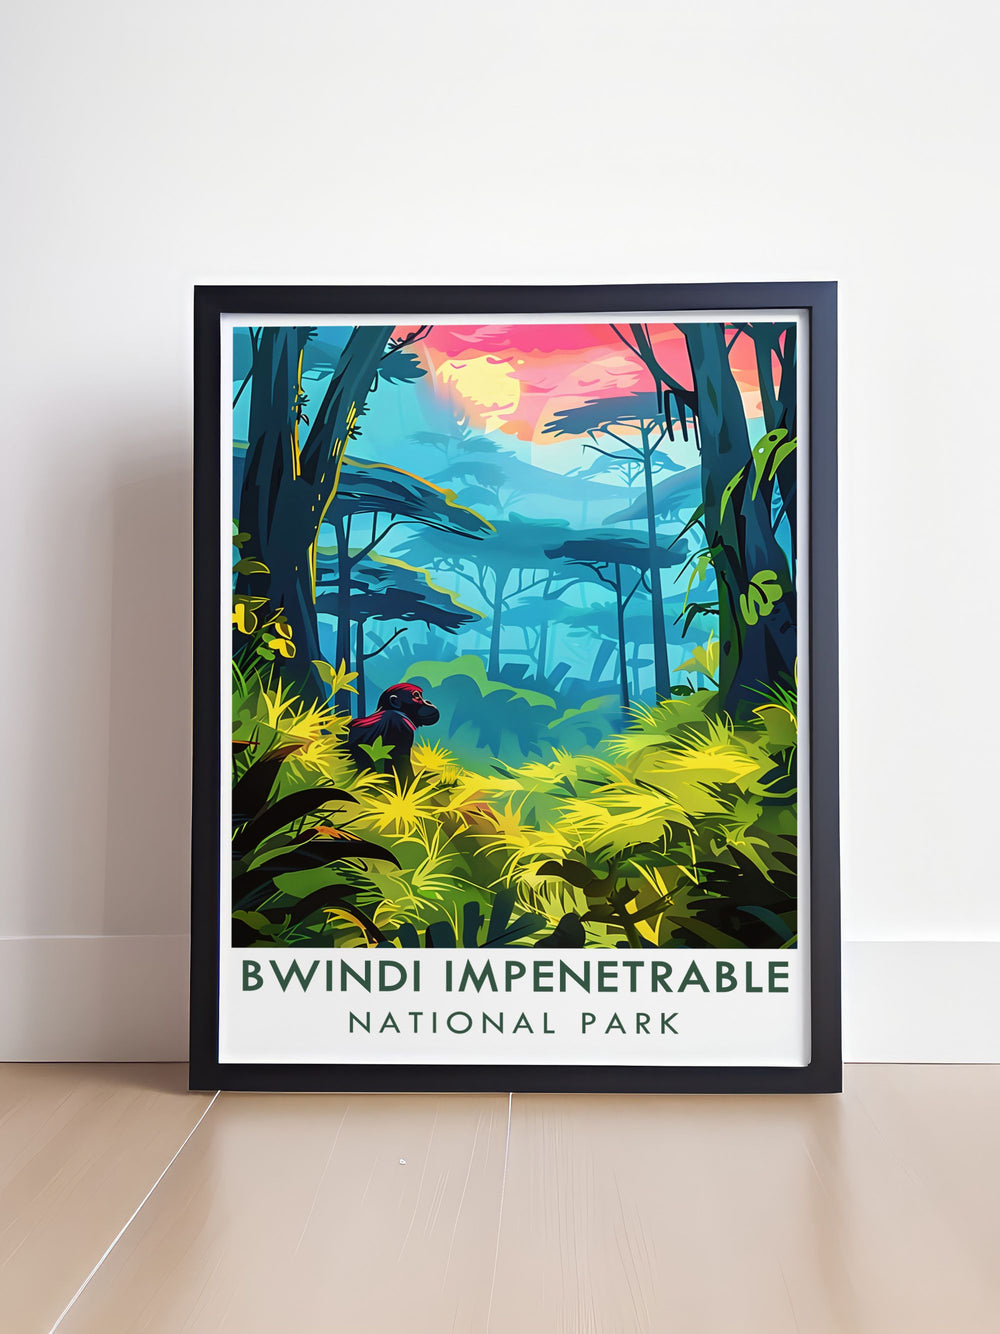 This travel poster captures the dense forests of Bwindi Impenetrable National Park, showcasing the lush greenery and rich biodiversity of this Ugandan treasure.